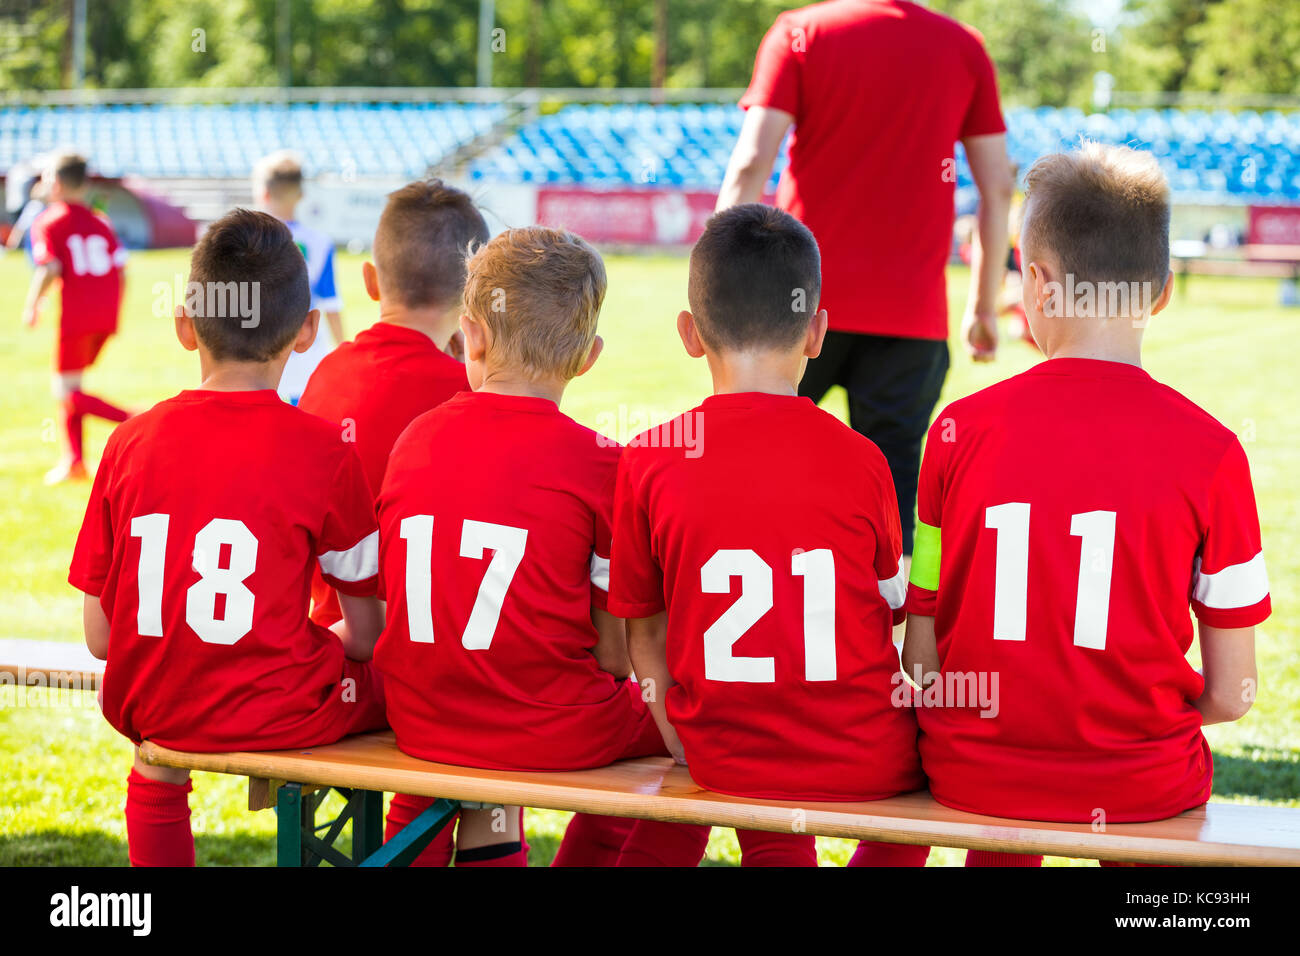 Kids Soccer Team. Youth Football Players with Soccer Coach. Young Substitute Player Sitting on Wooden Bench. Stock Photo